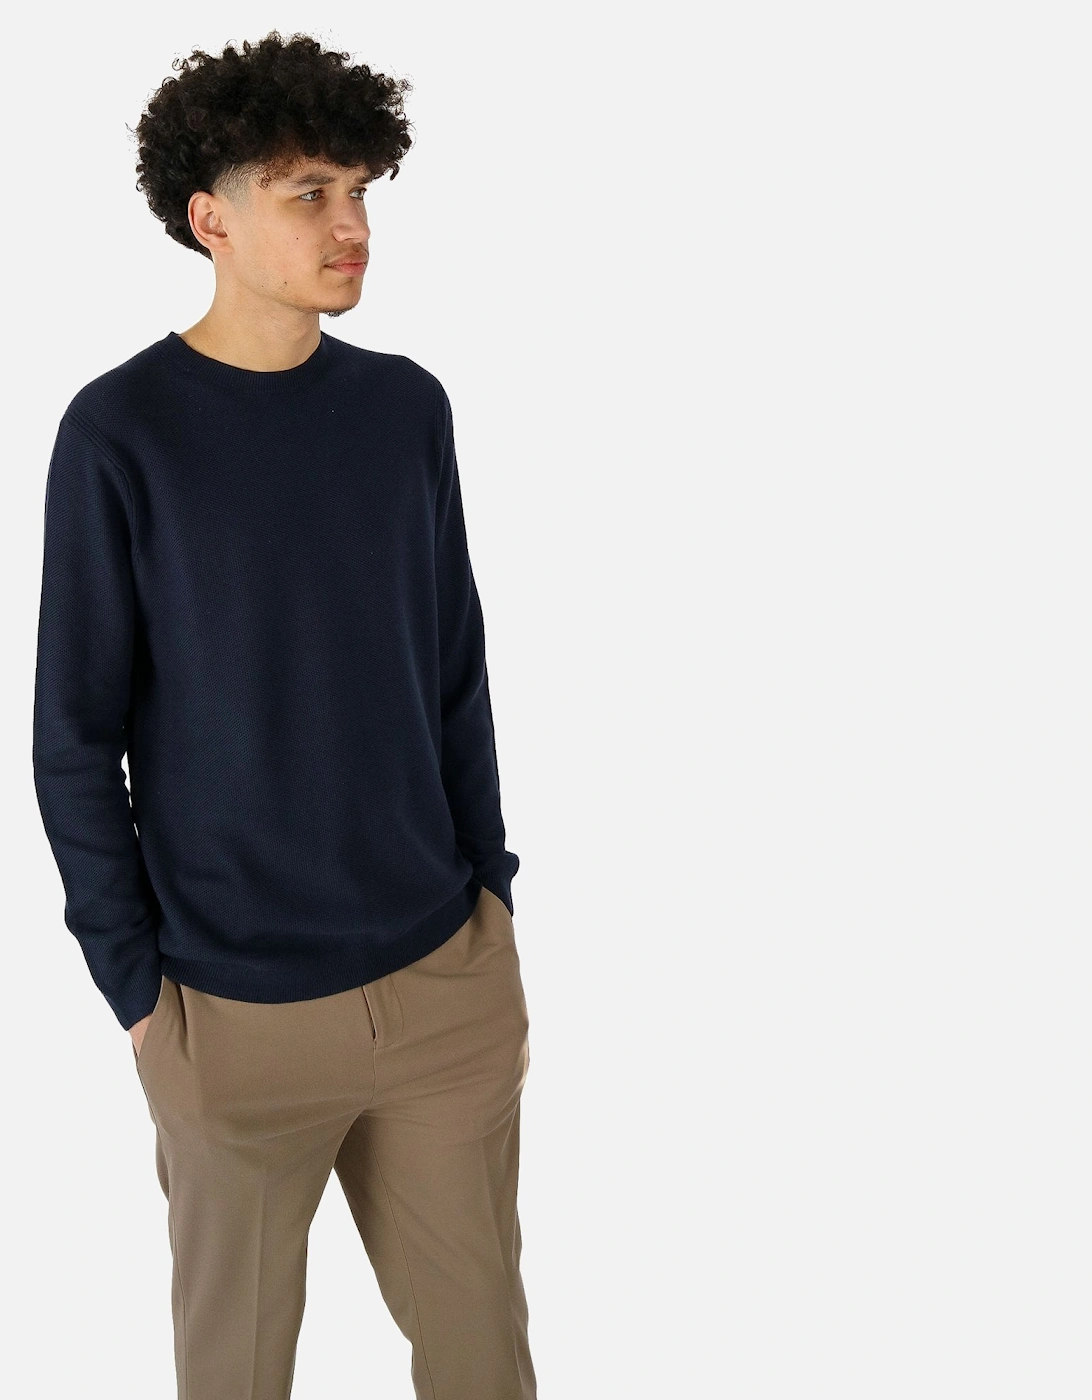 Textured Knitted Navy Jumper